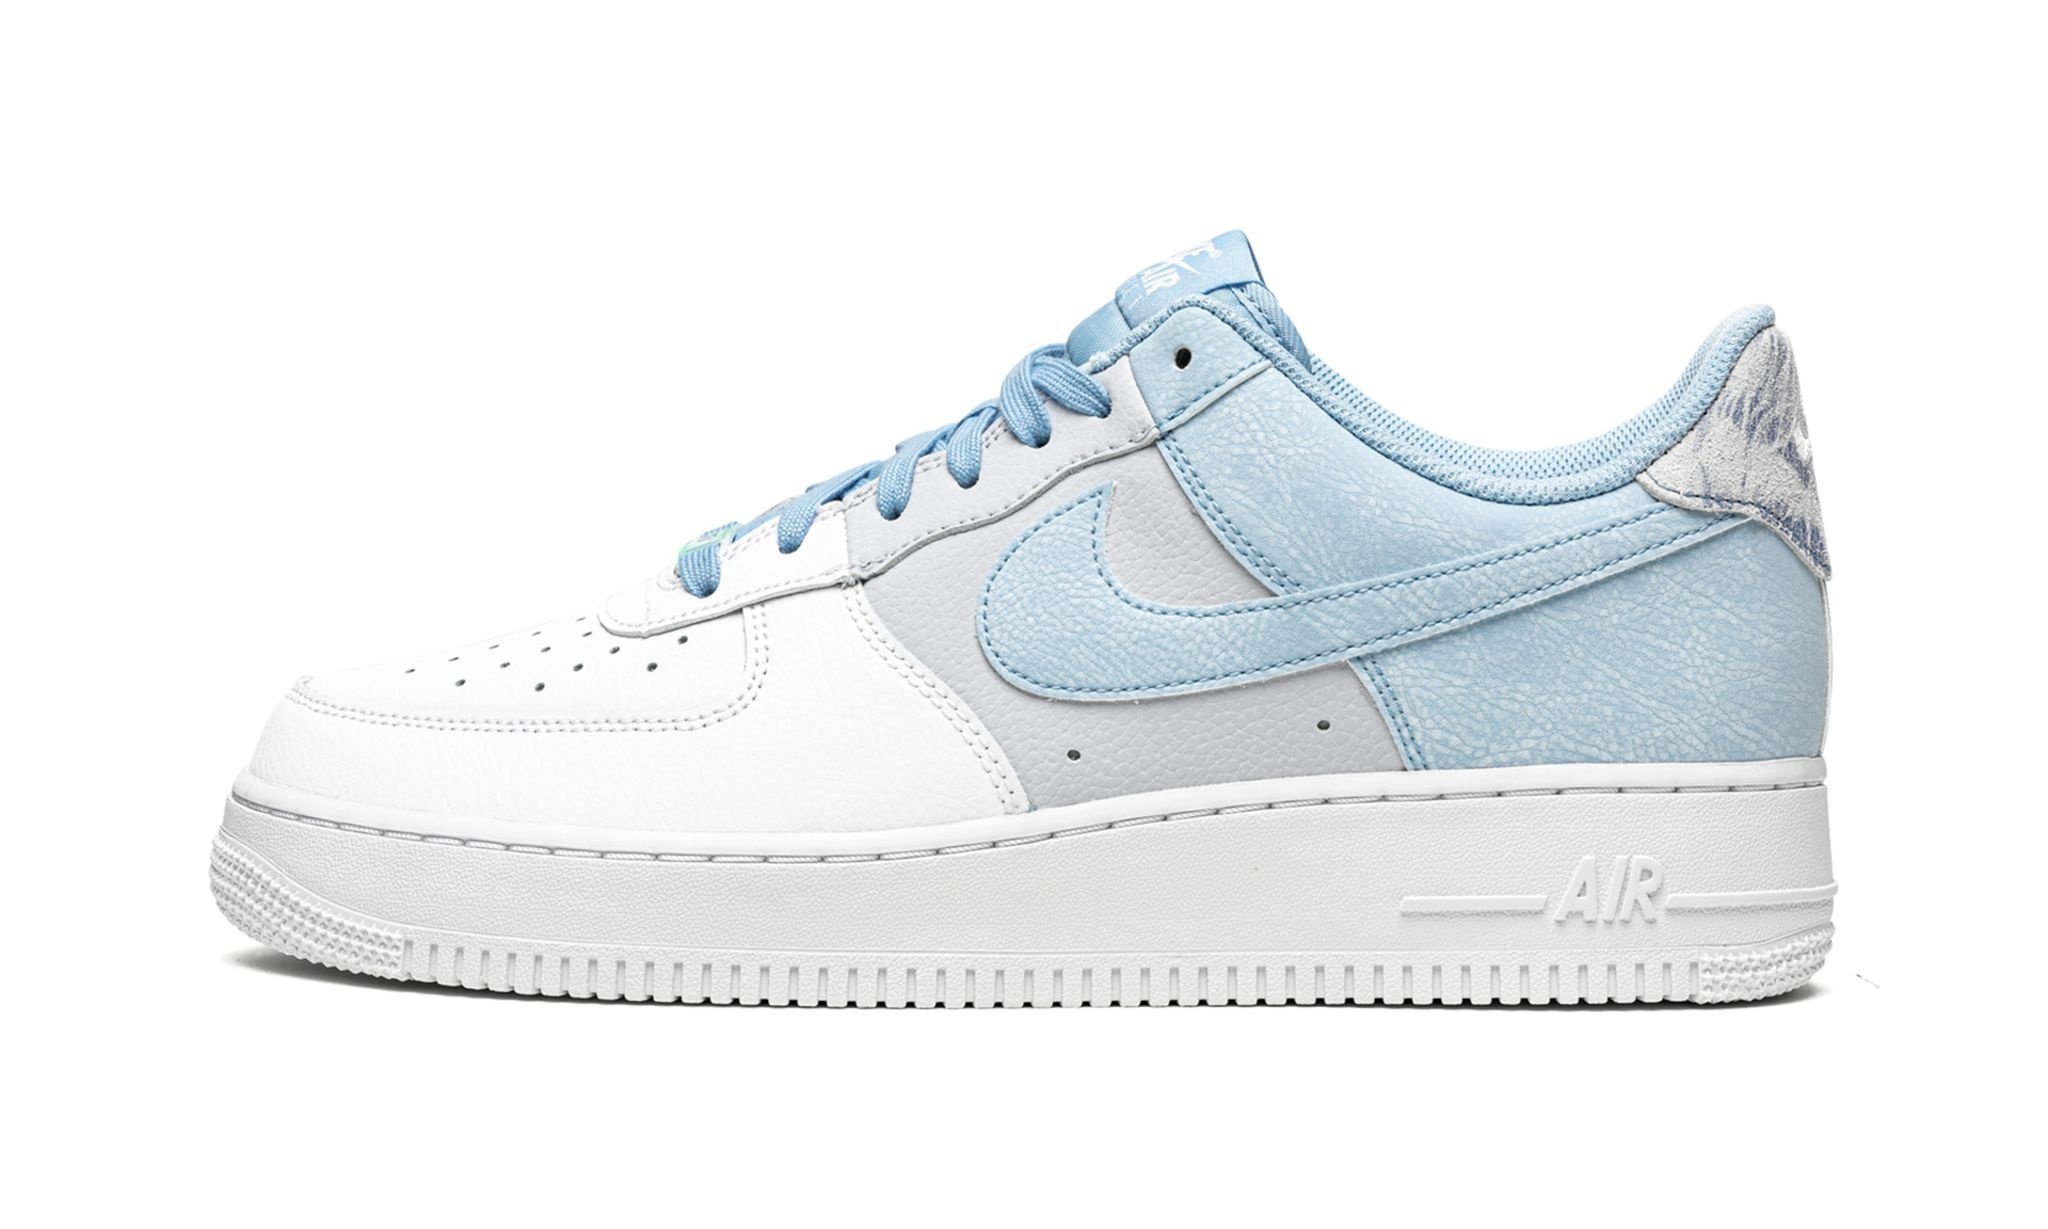 Air Force 1 '07 LV8 "Psychic Blue" - 1